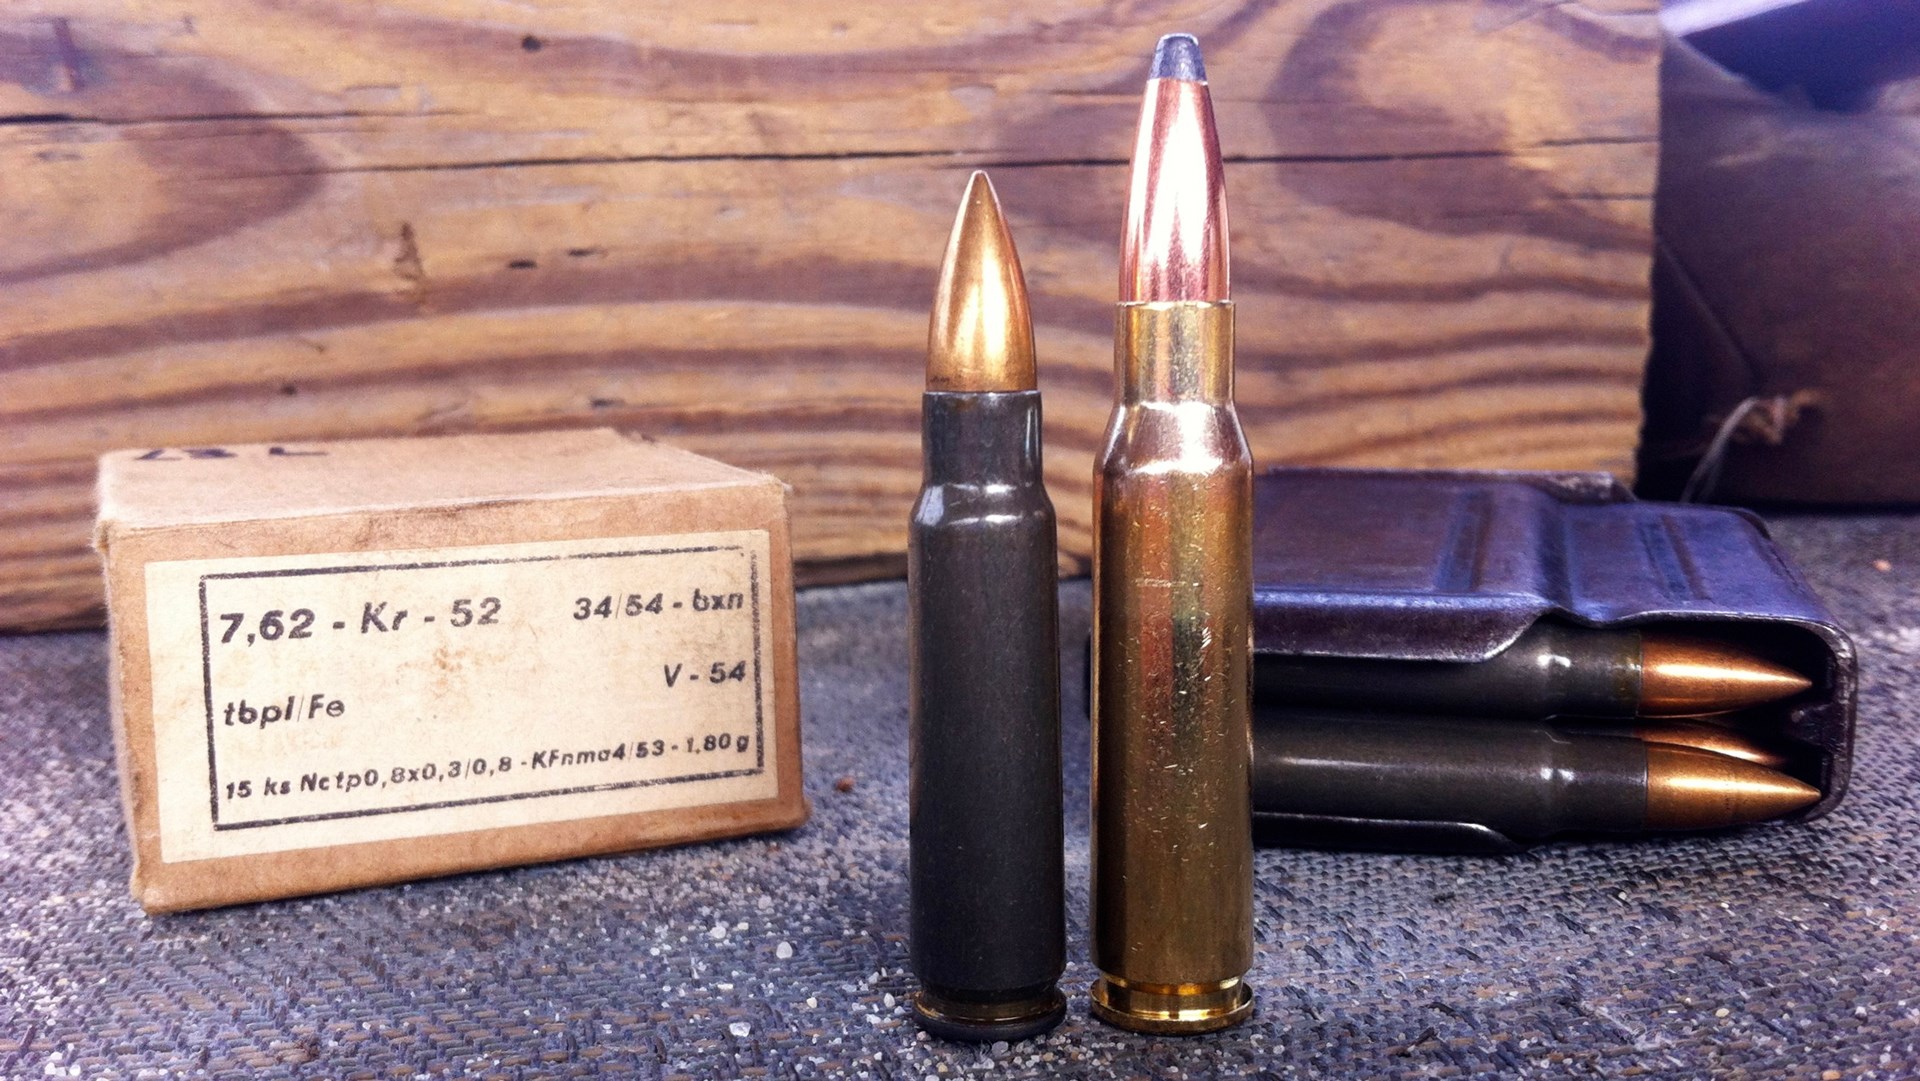 A 7.62×45 mm cartridge (left) and a 7.62×51 mm NATO cartridge (right) are seen here with an original box of Czech 7.62×45 mm ammunition and a loaded vz. 52 rifle magazine. Image courtesy of Martin K.A. Morgan.